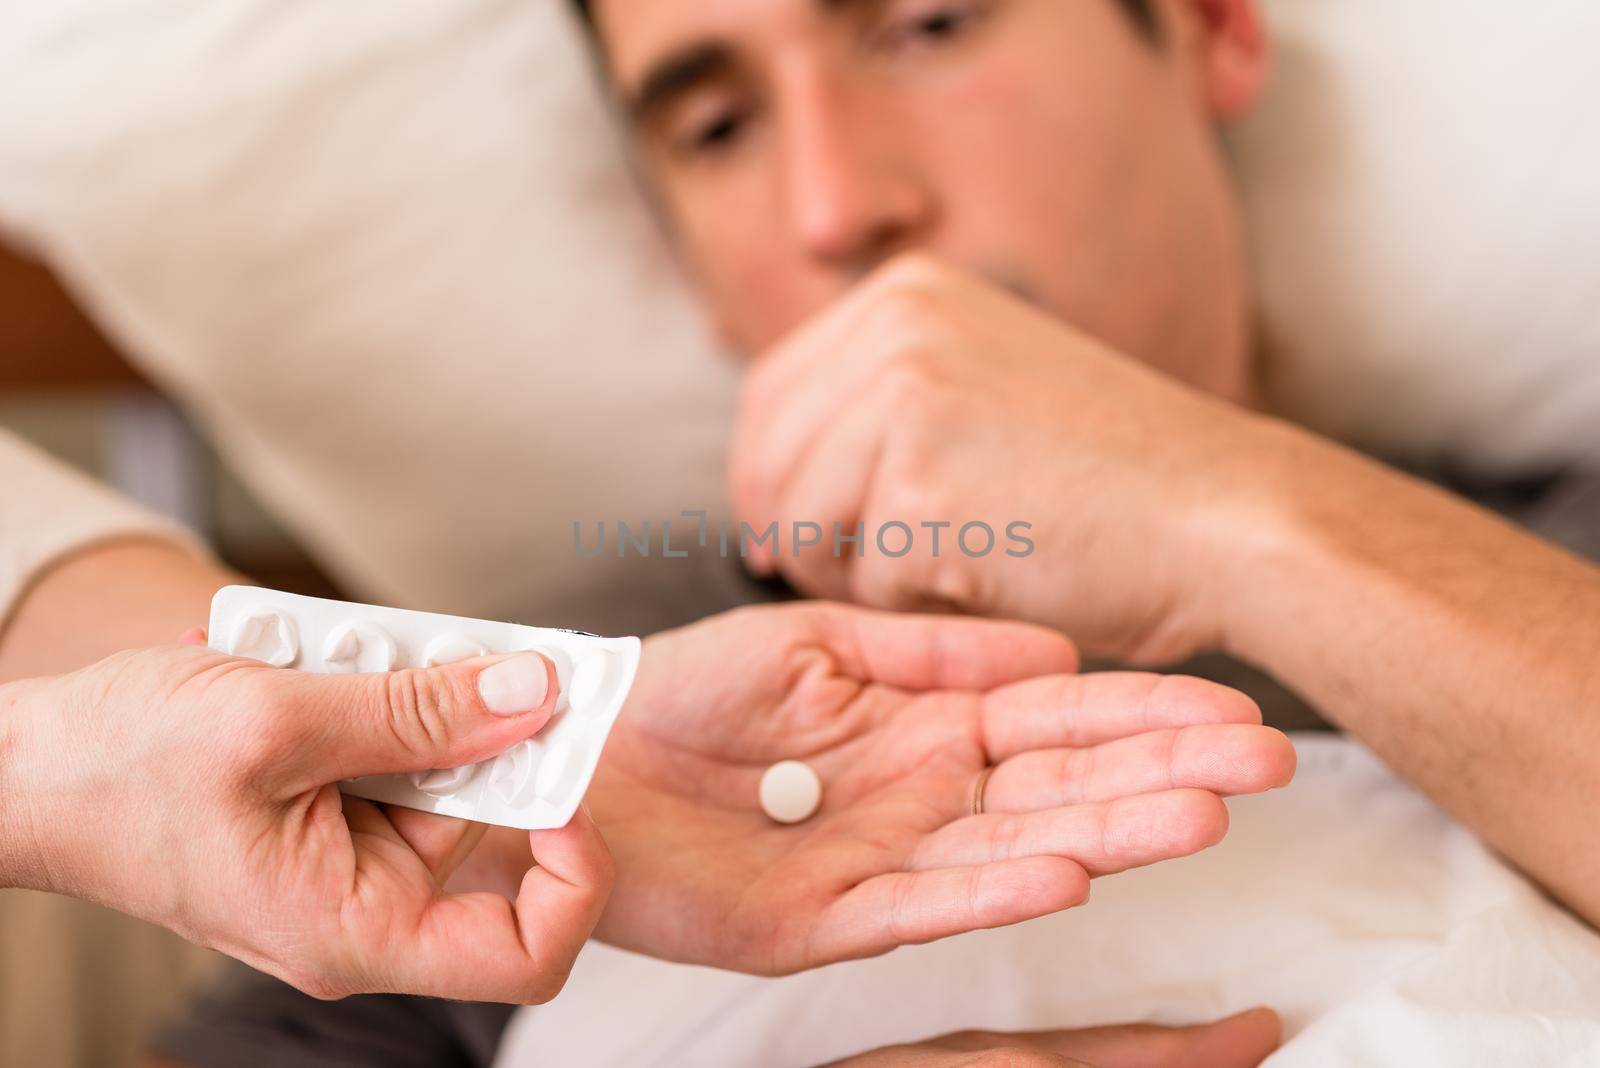 Sick man taking medication offered by a nurse who is holding a single pill in one hand and blister pack in the other